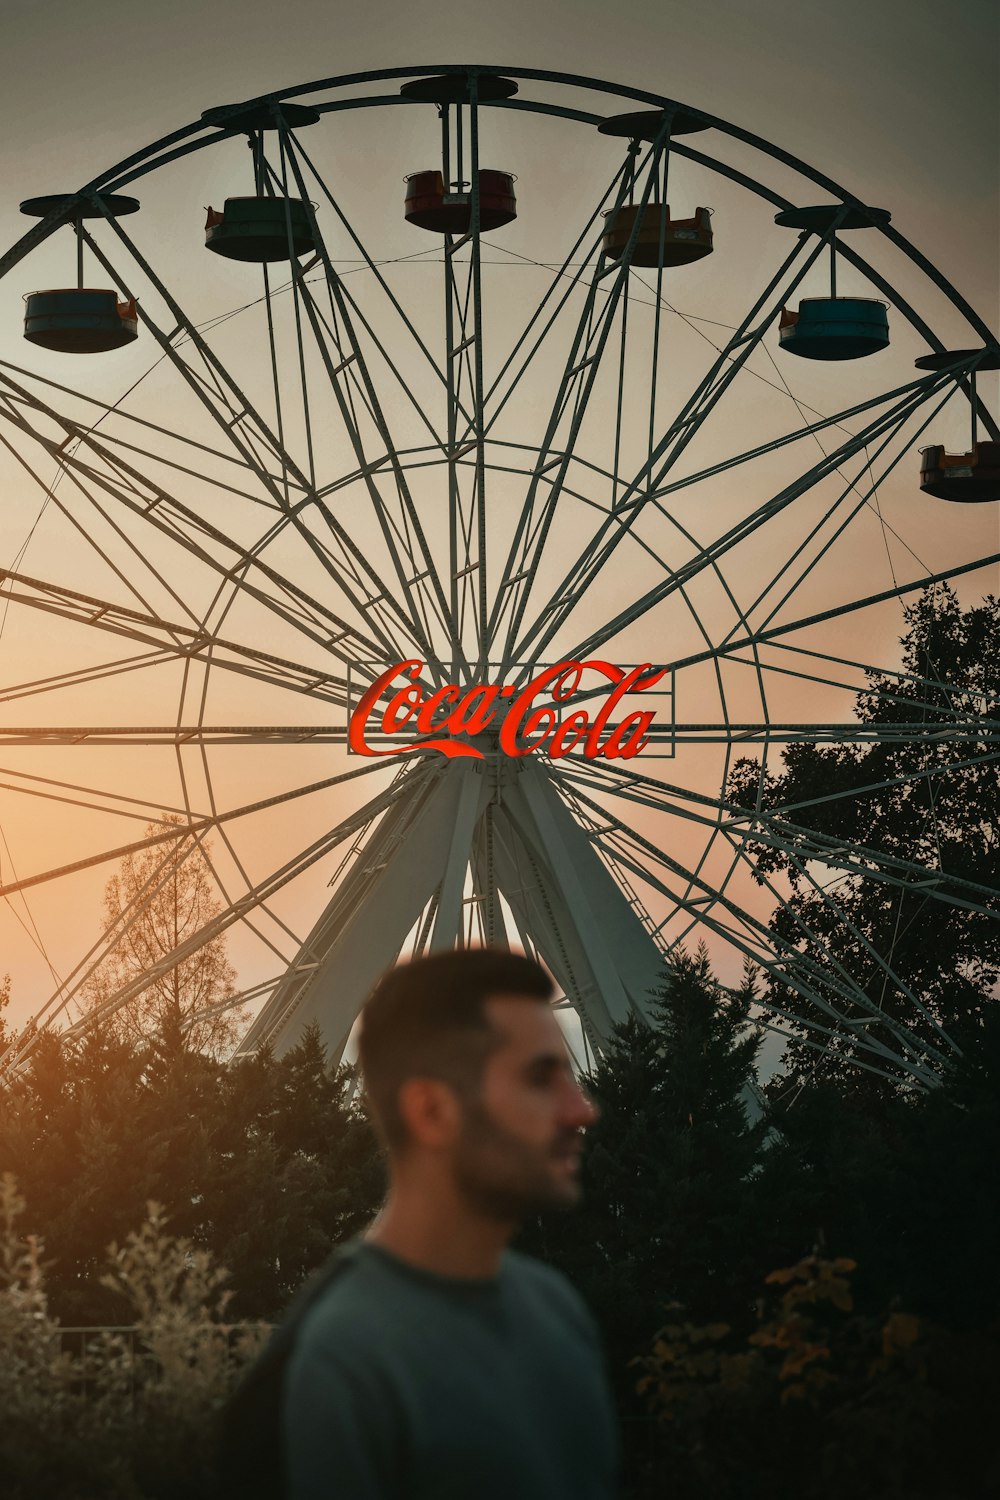 a man standing in front of a ferris wheel